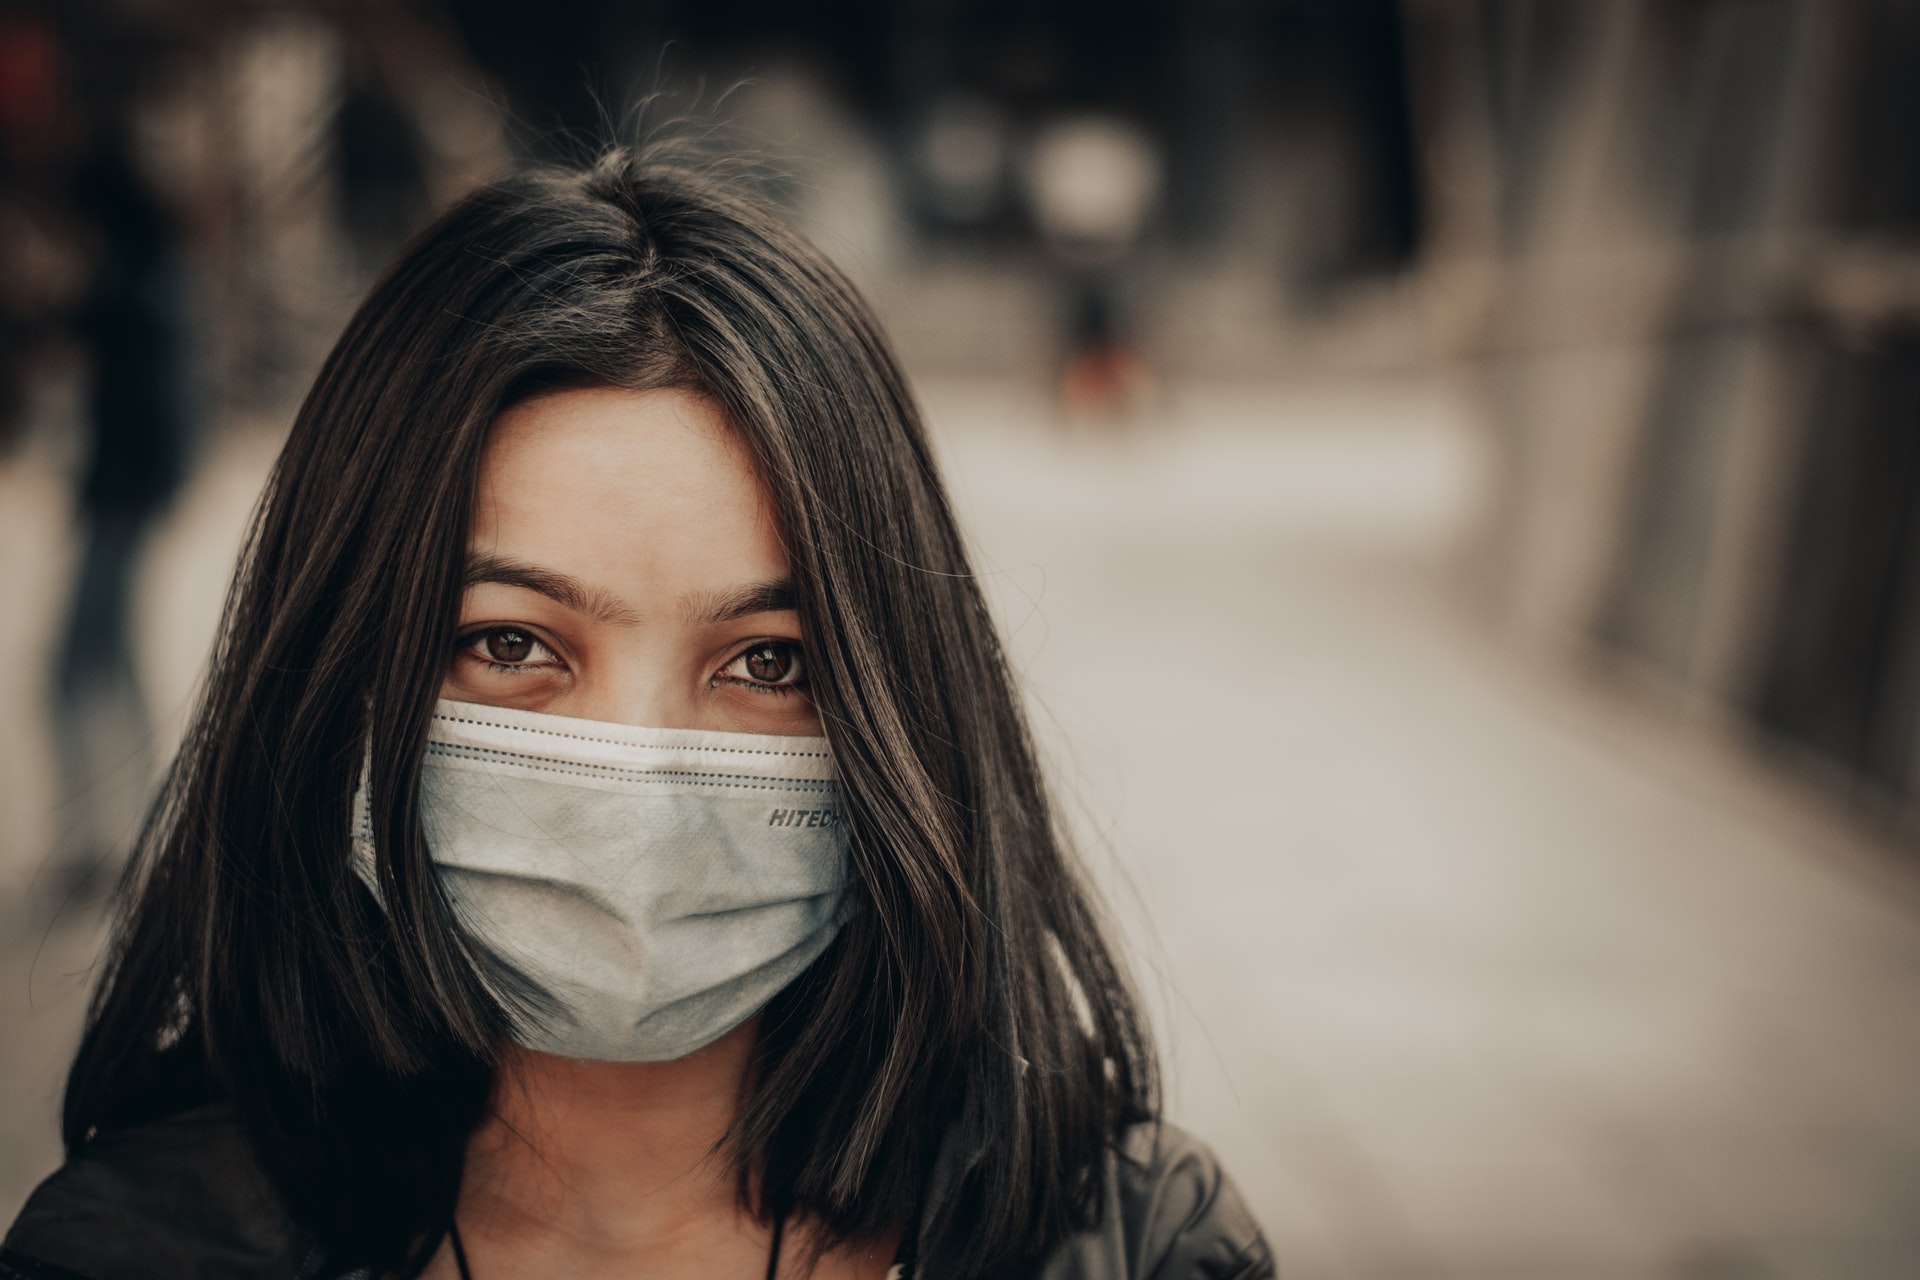 Young woman with dark hair and surgical mask